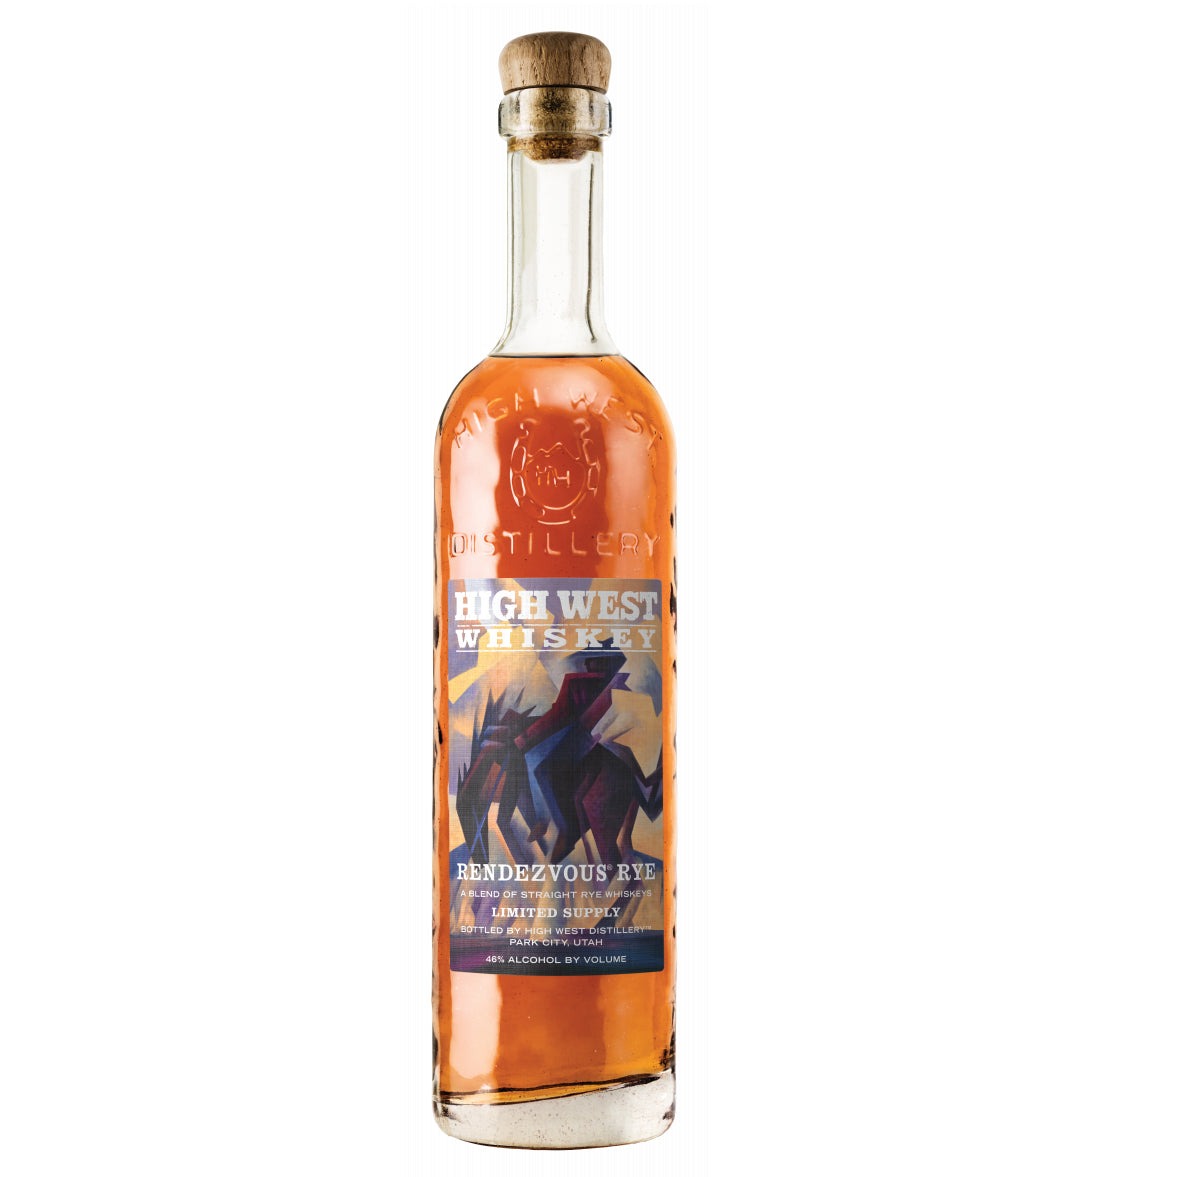 High West Whiskey - Rendezvous Rye Limited Supply 750ml